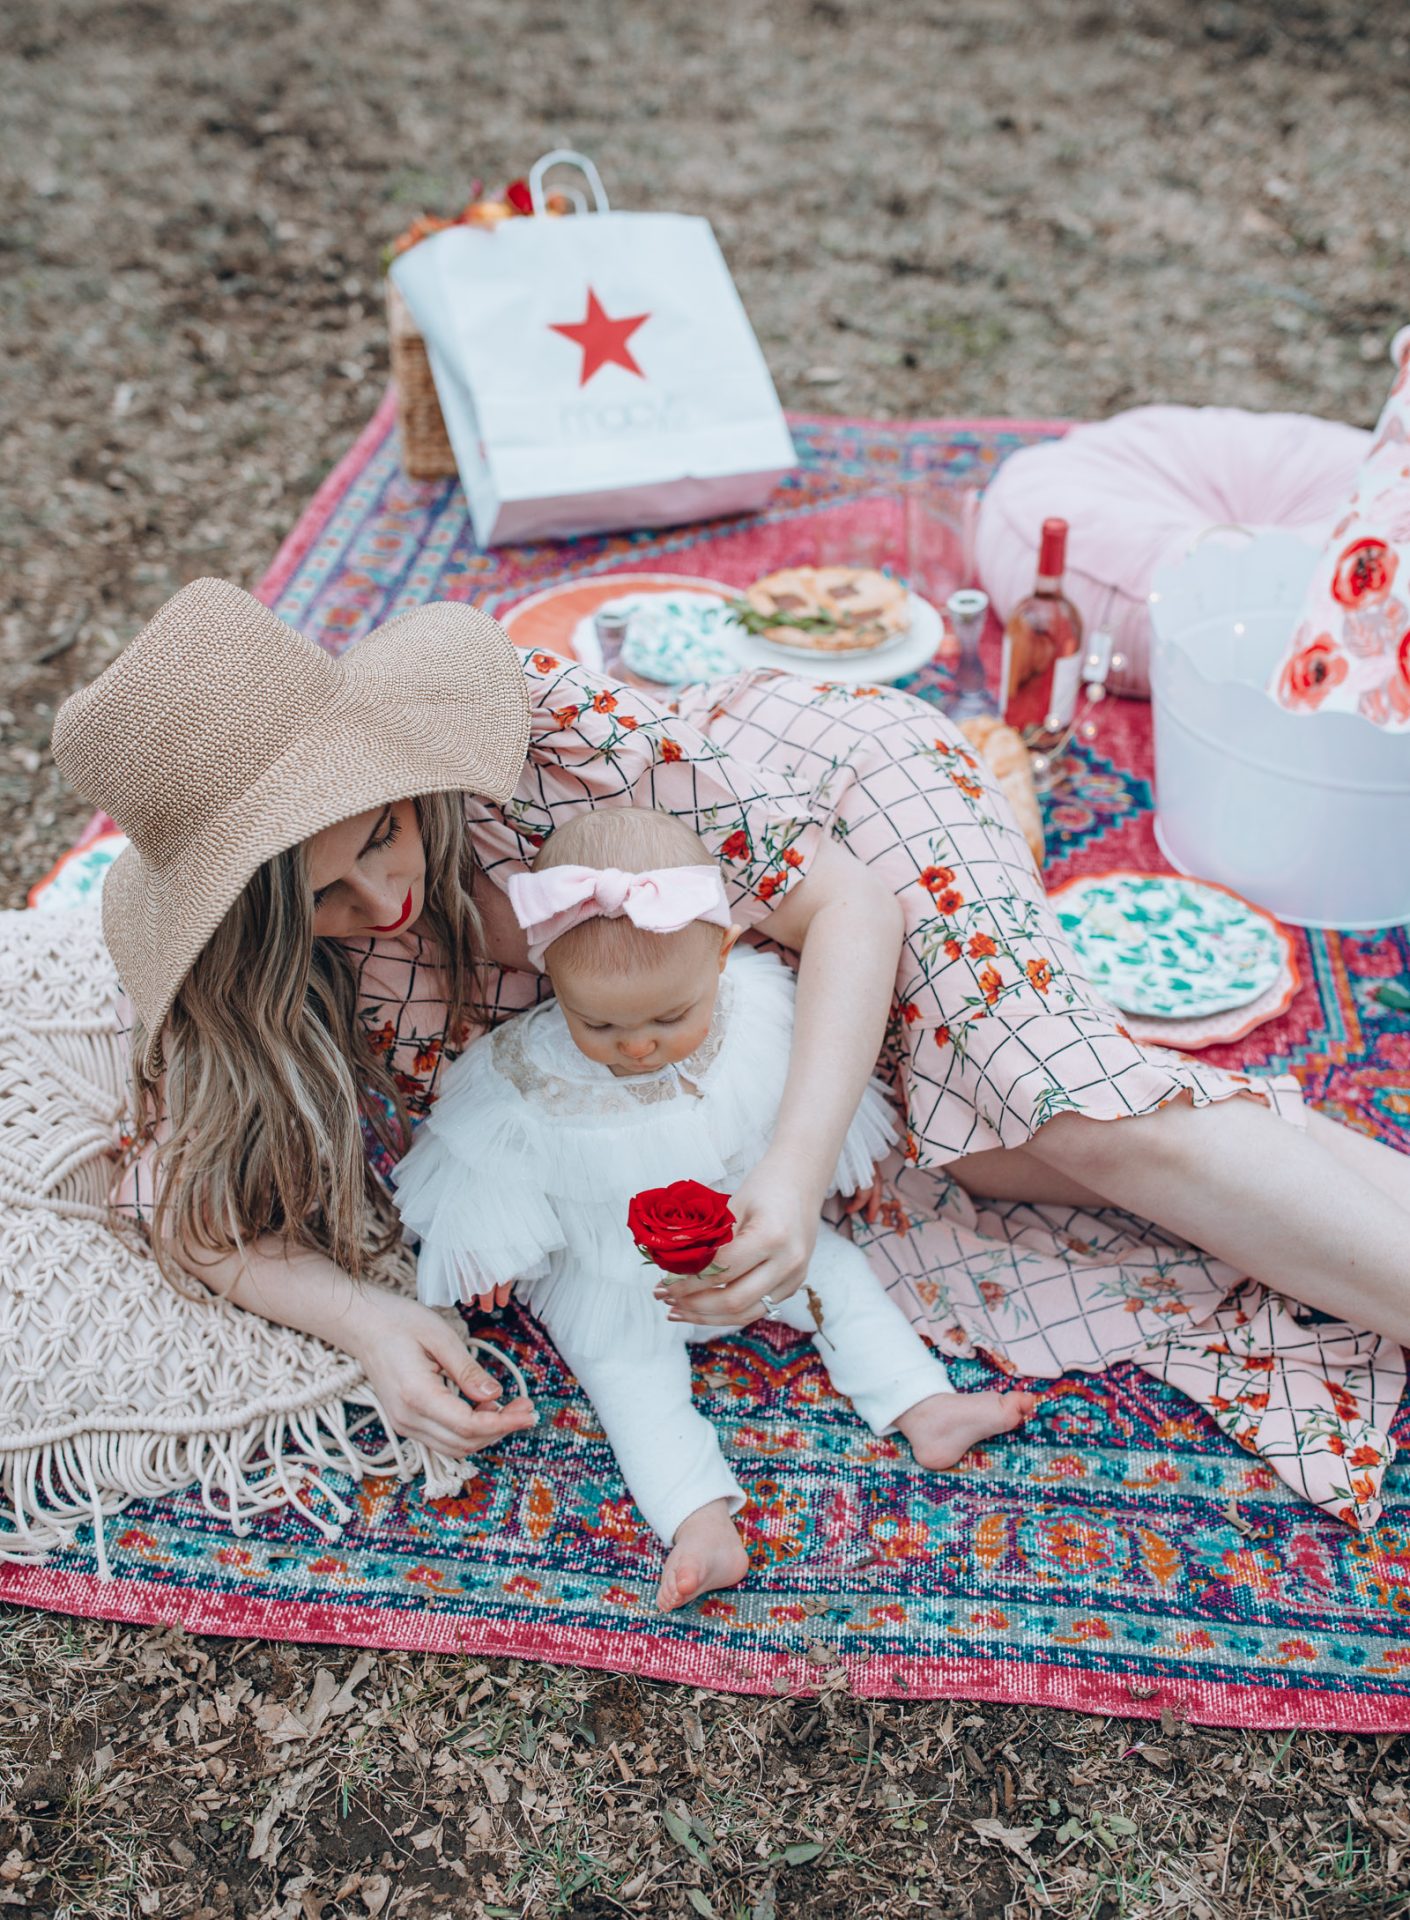 Chicago lifestyle blogger Happily Inspired is sharing the most colorful, bright, and fun Mother’s Day Picnic set up. Think all things bright and colorful!